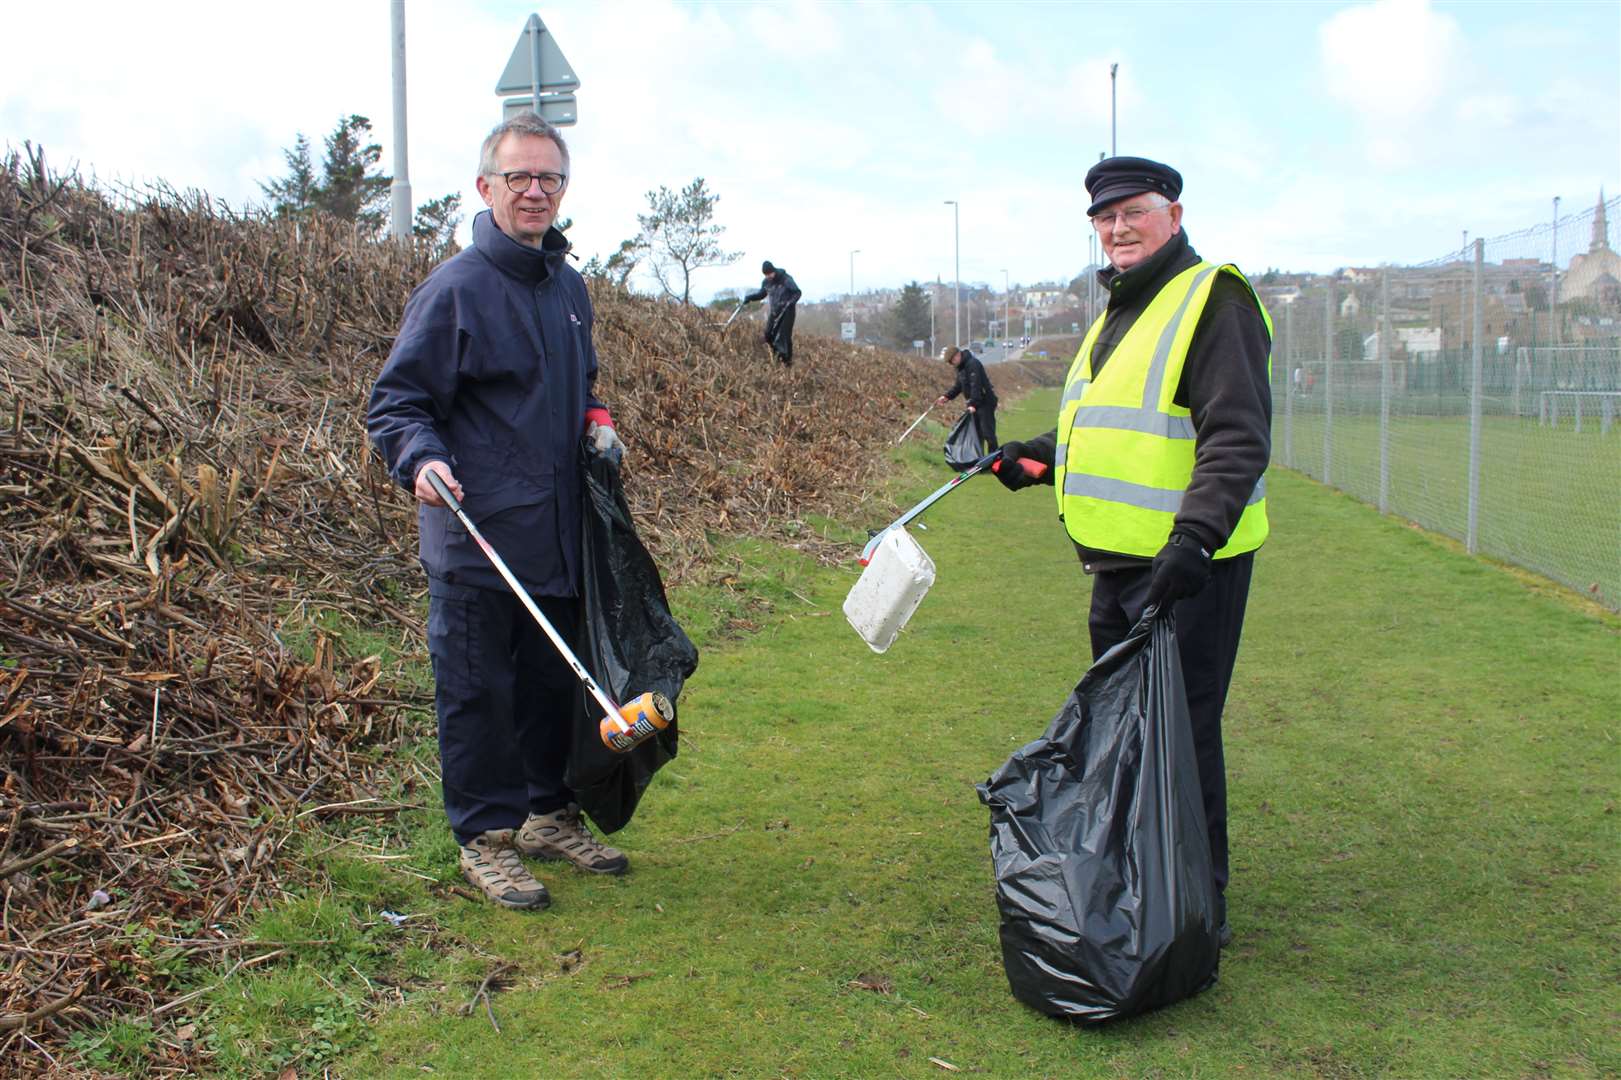 Banff Rotary Club members carried out litter picking at the Canal Park area in the town. Picture: Kyle Ritchie